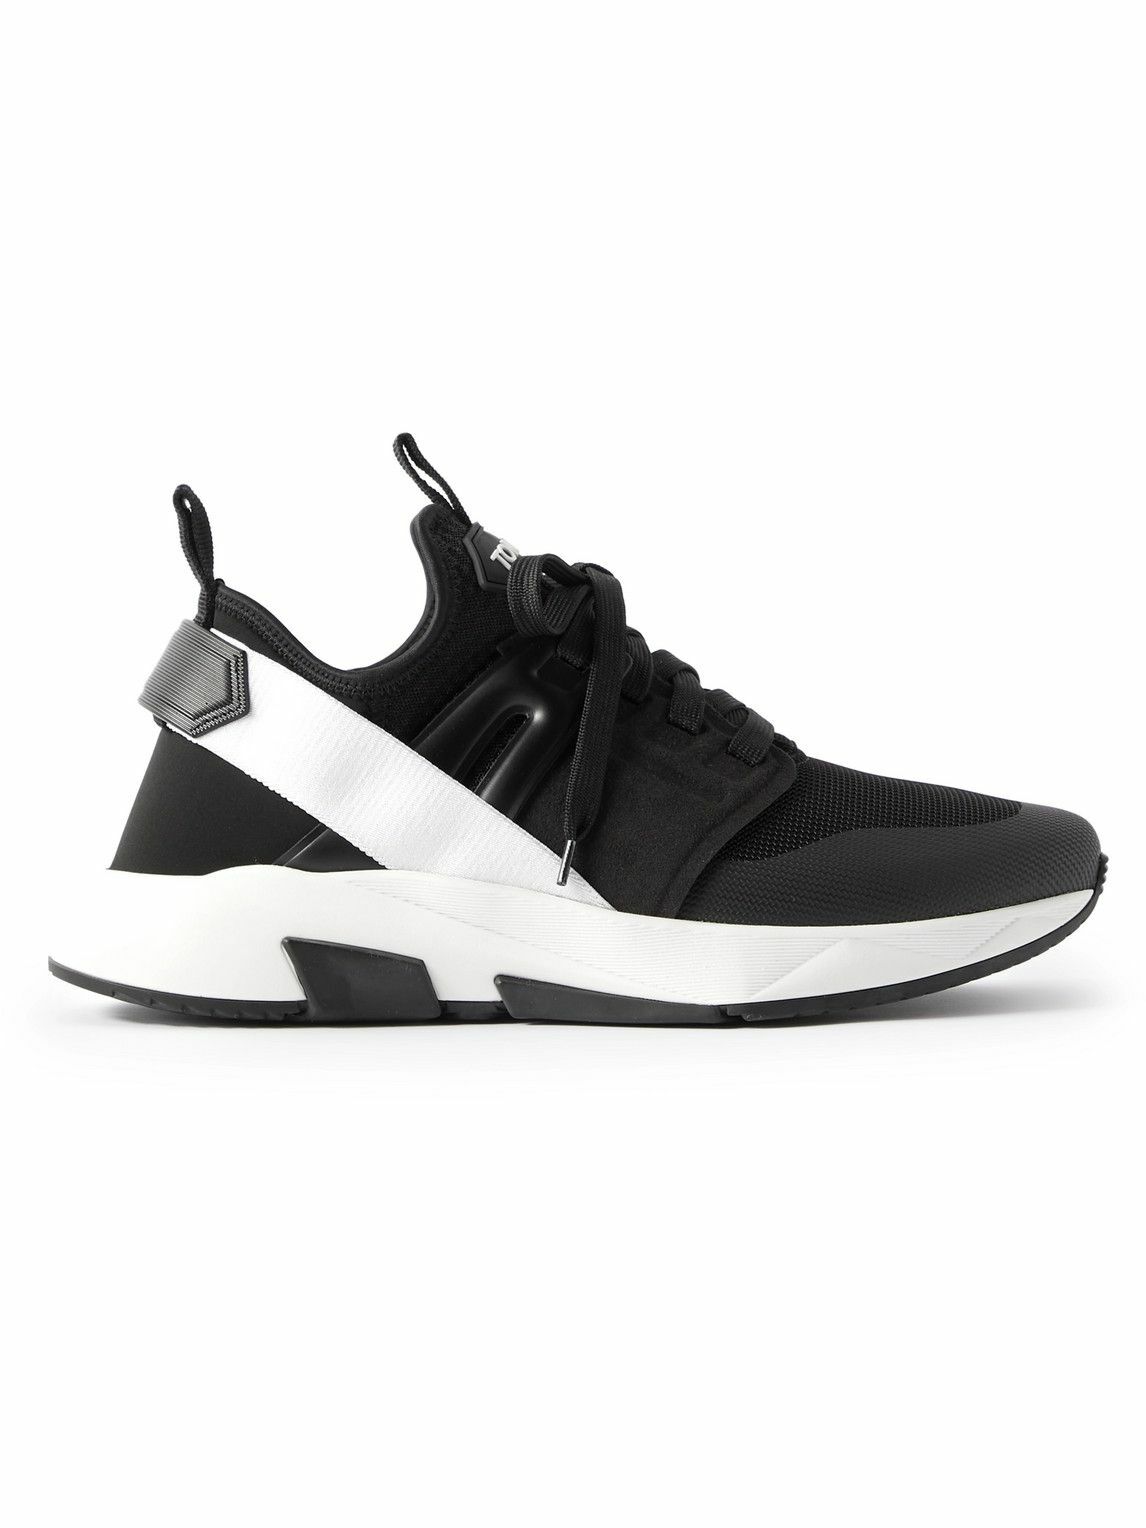 TOM FORD - Jago Neoprene, Suede and Leather Sneakers - Black TOM FORD